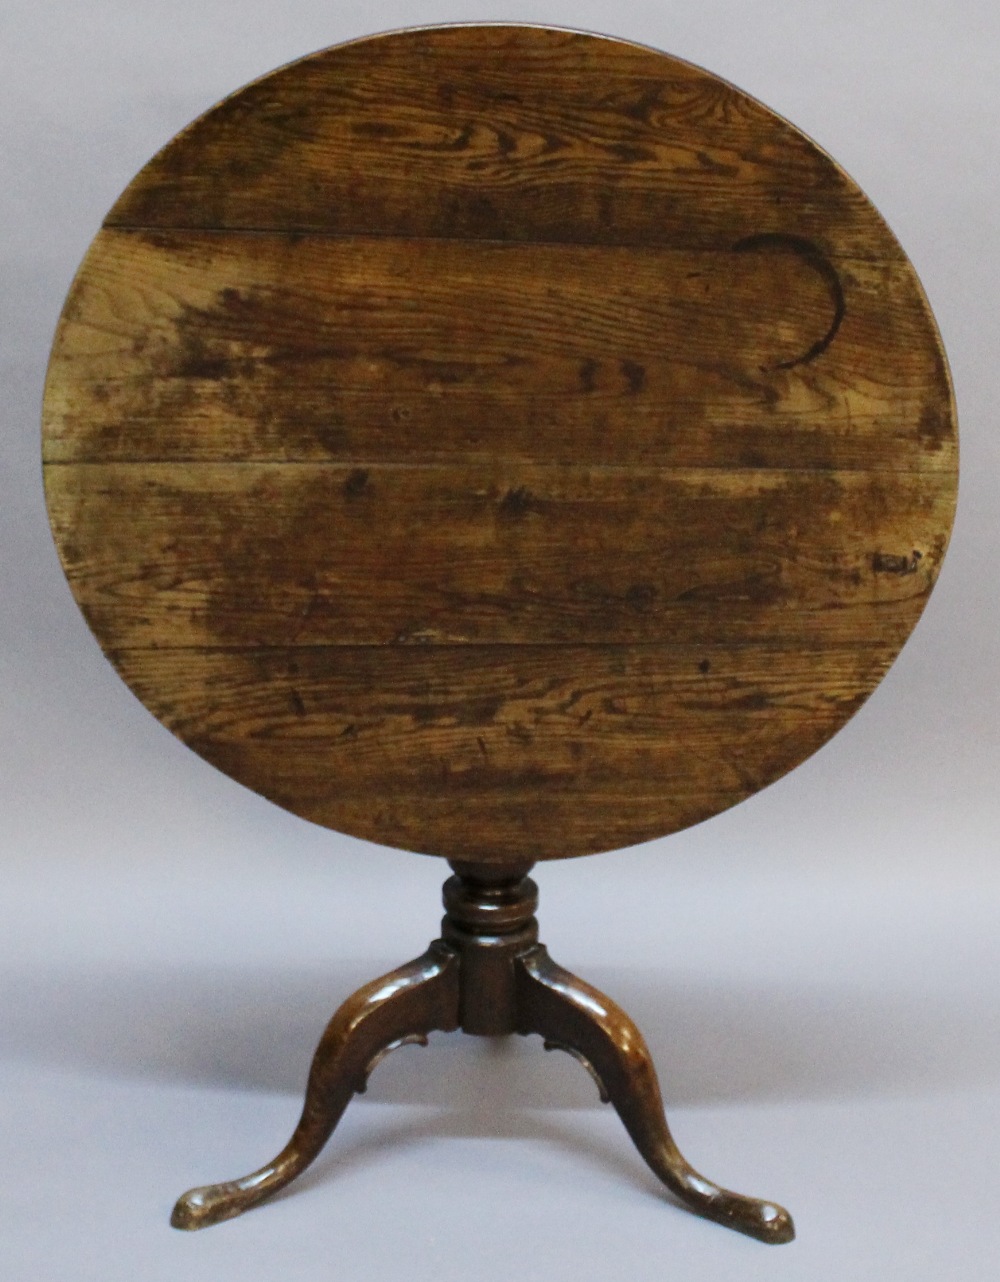 A GEORGIAN OAK SNAP-TOP STEM TABLE having a circular planked top, snap-top action and turned column,